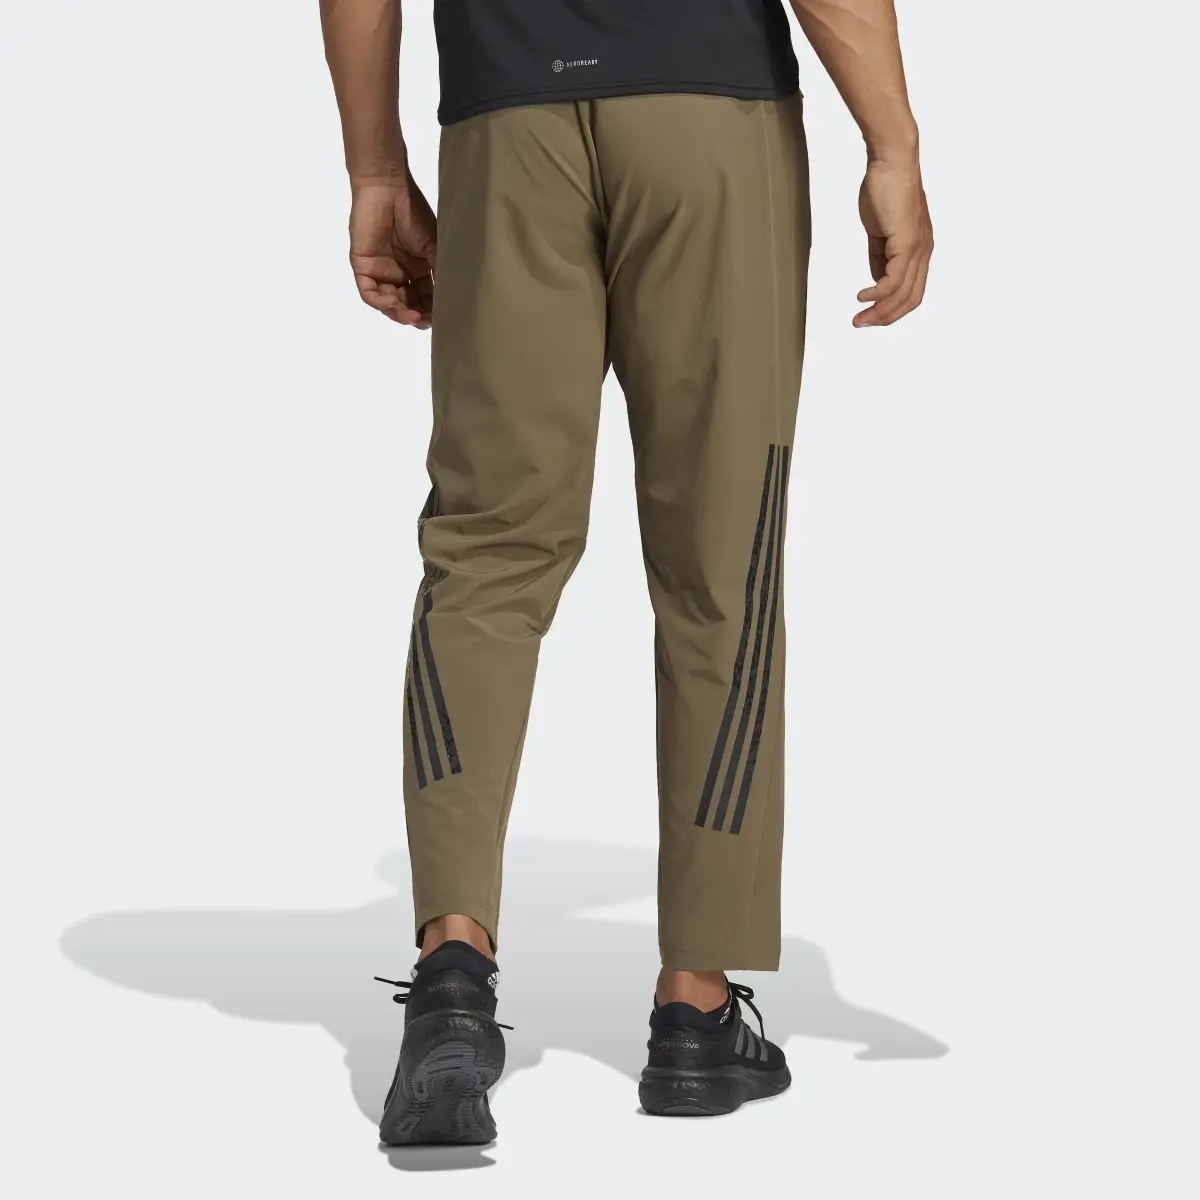 Adidas Pantalon HIIT Curated By Cody Rigsby. 2